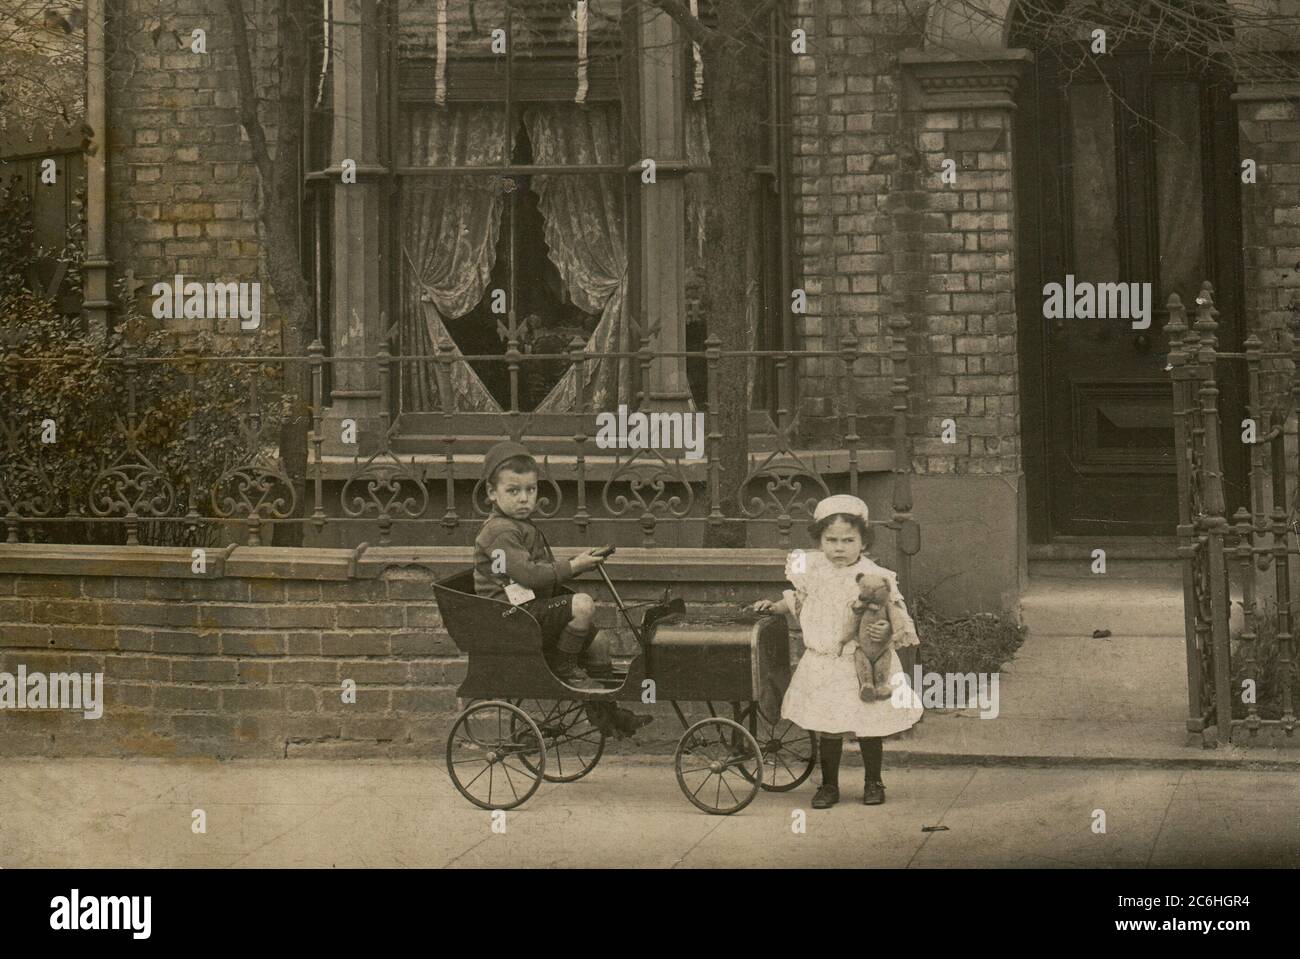 England. Circa 1910. A young boy and his sister are posing for a photograph outside their house. The boy is sitting in a peddle car and has a toy bus conductor's ticket machine slung over his shoulder. The girl is holding a teddy bear. Stock Photo